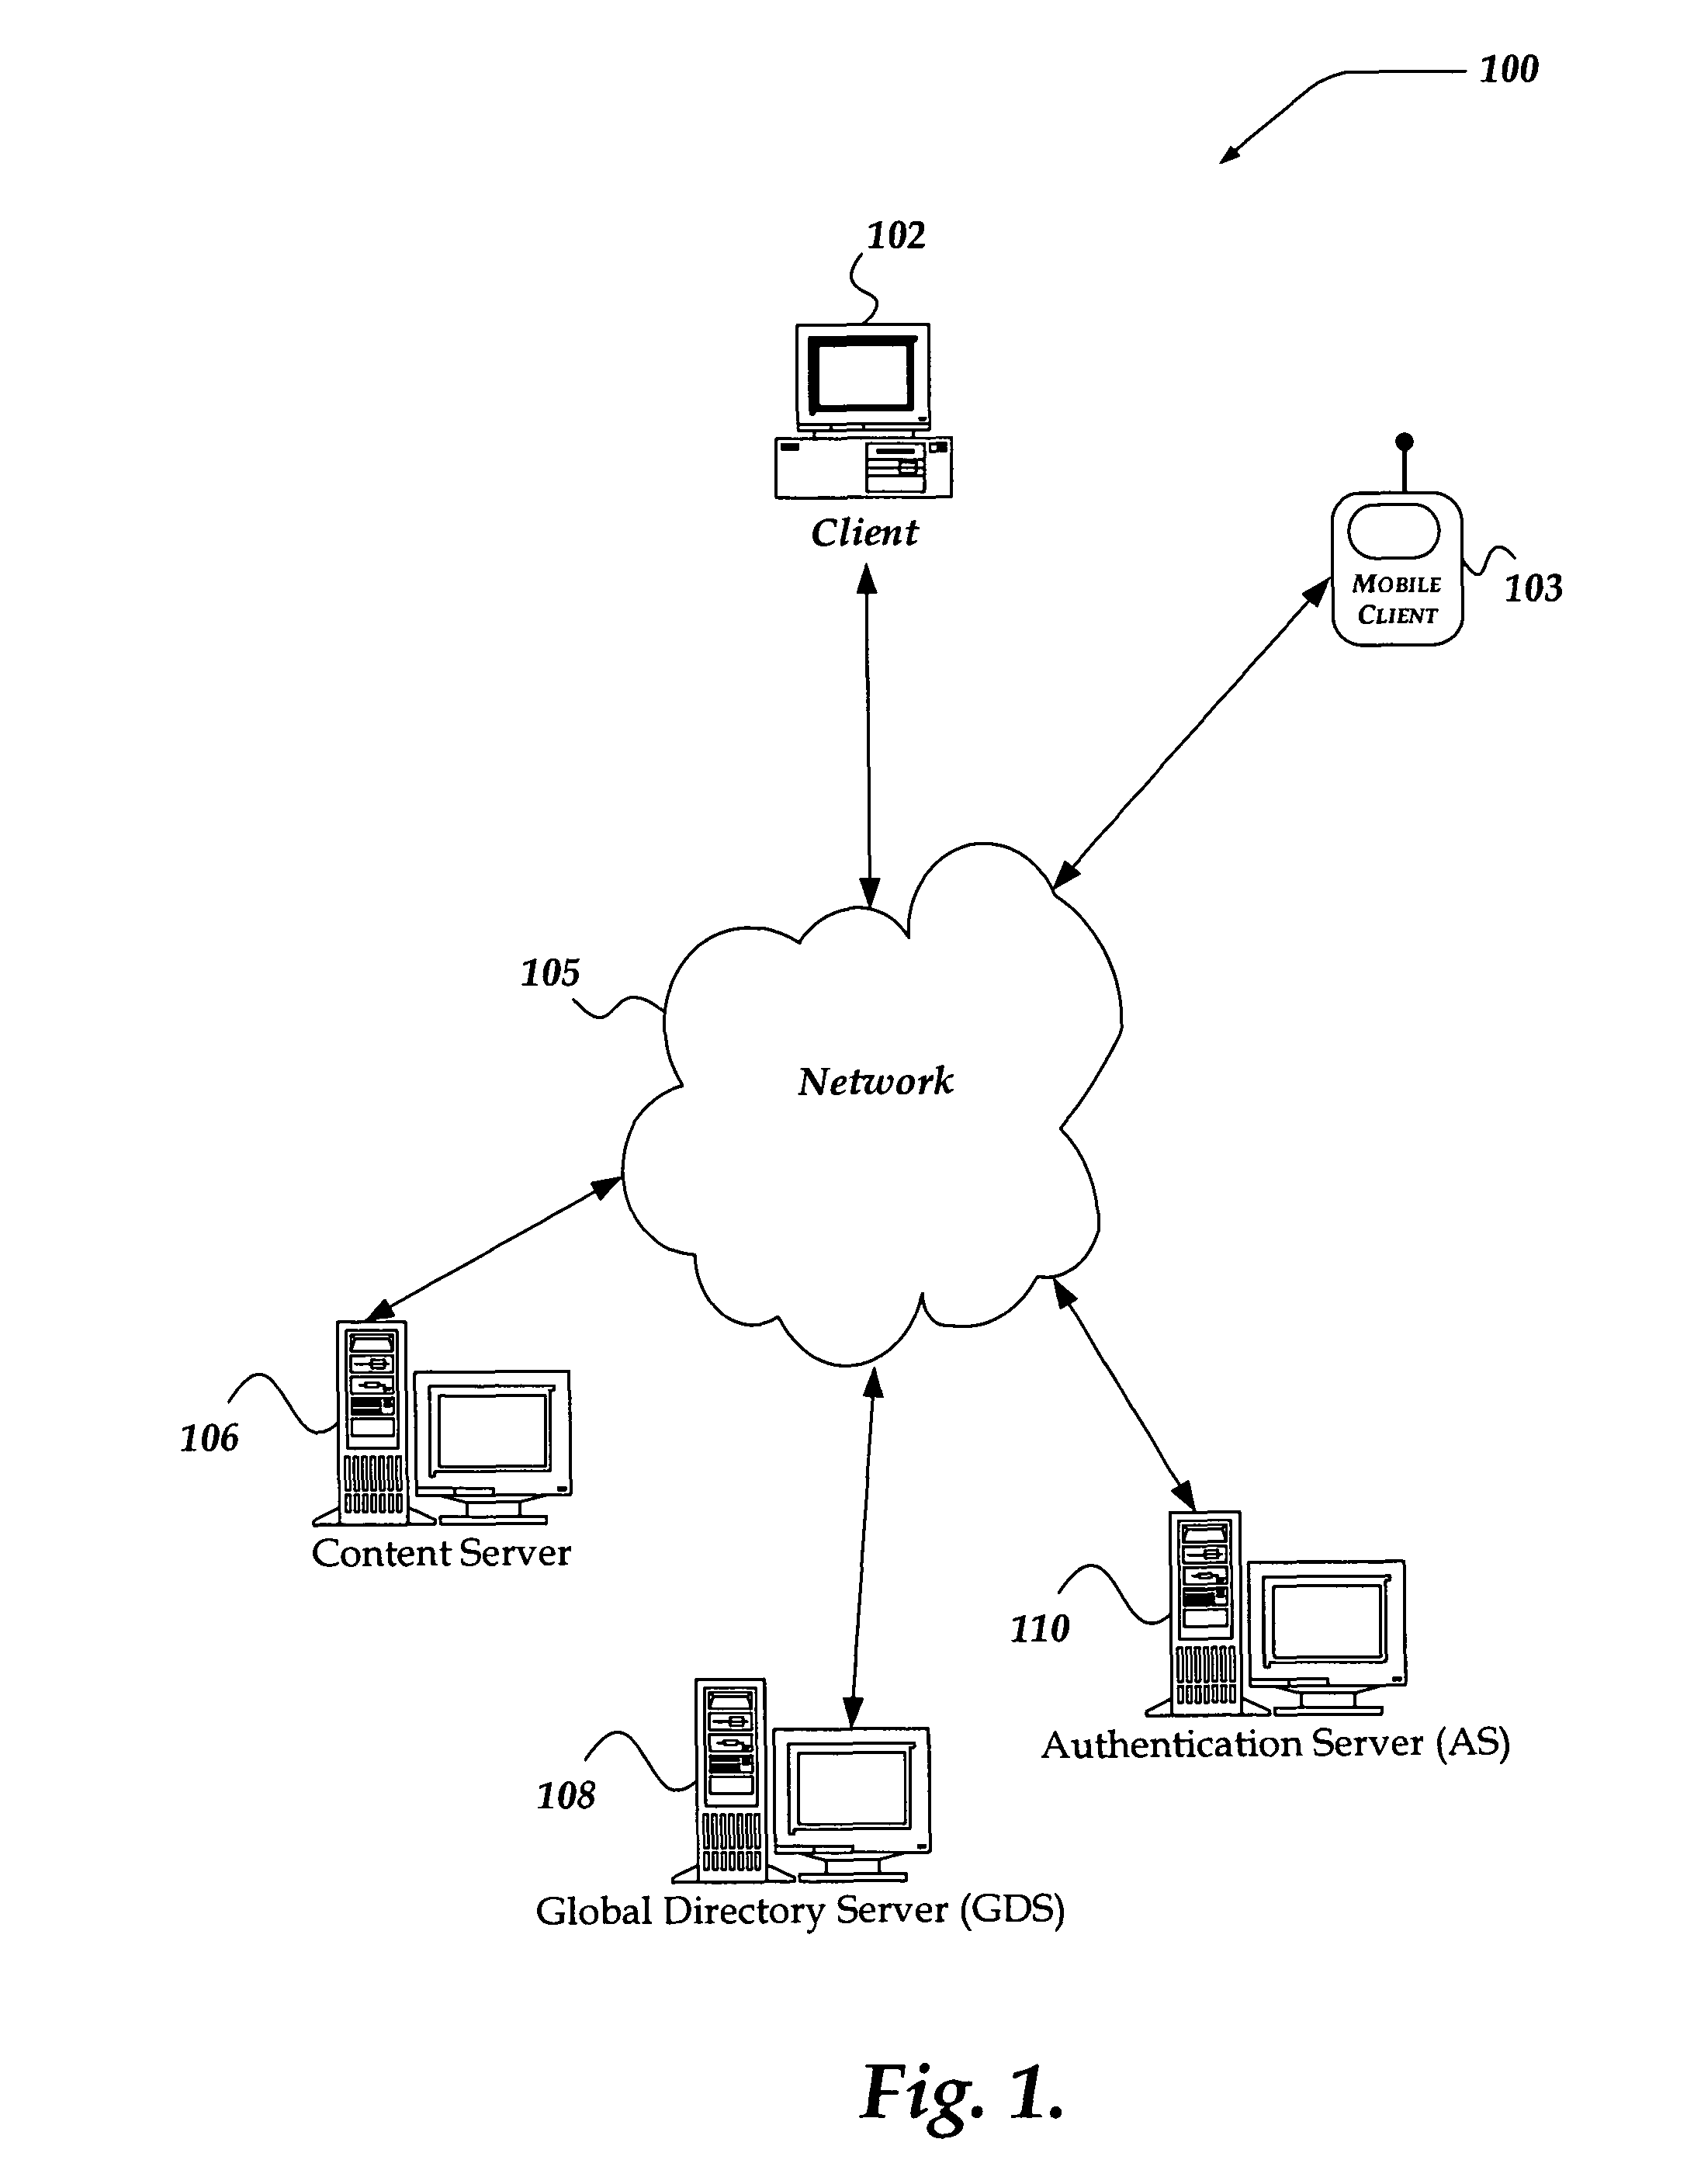 Managing pre-release of a game application over a network